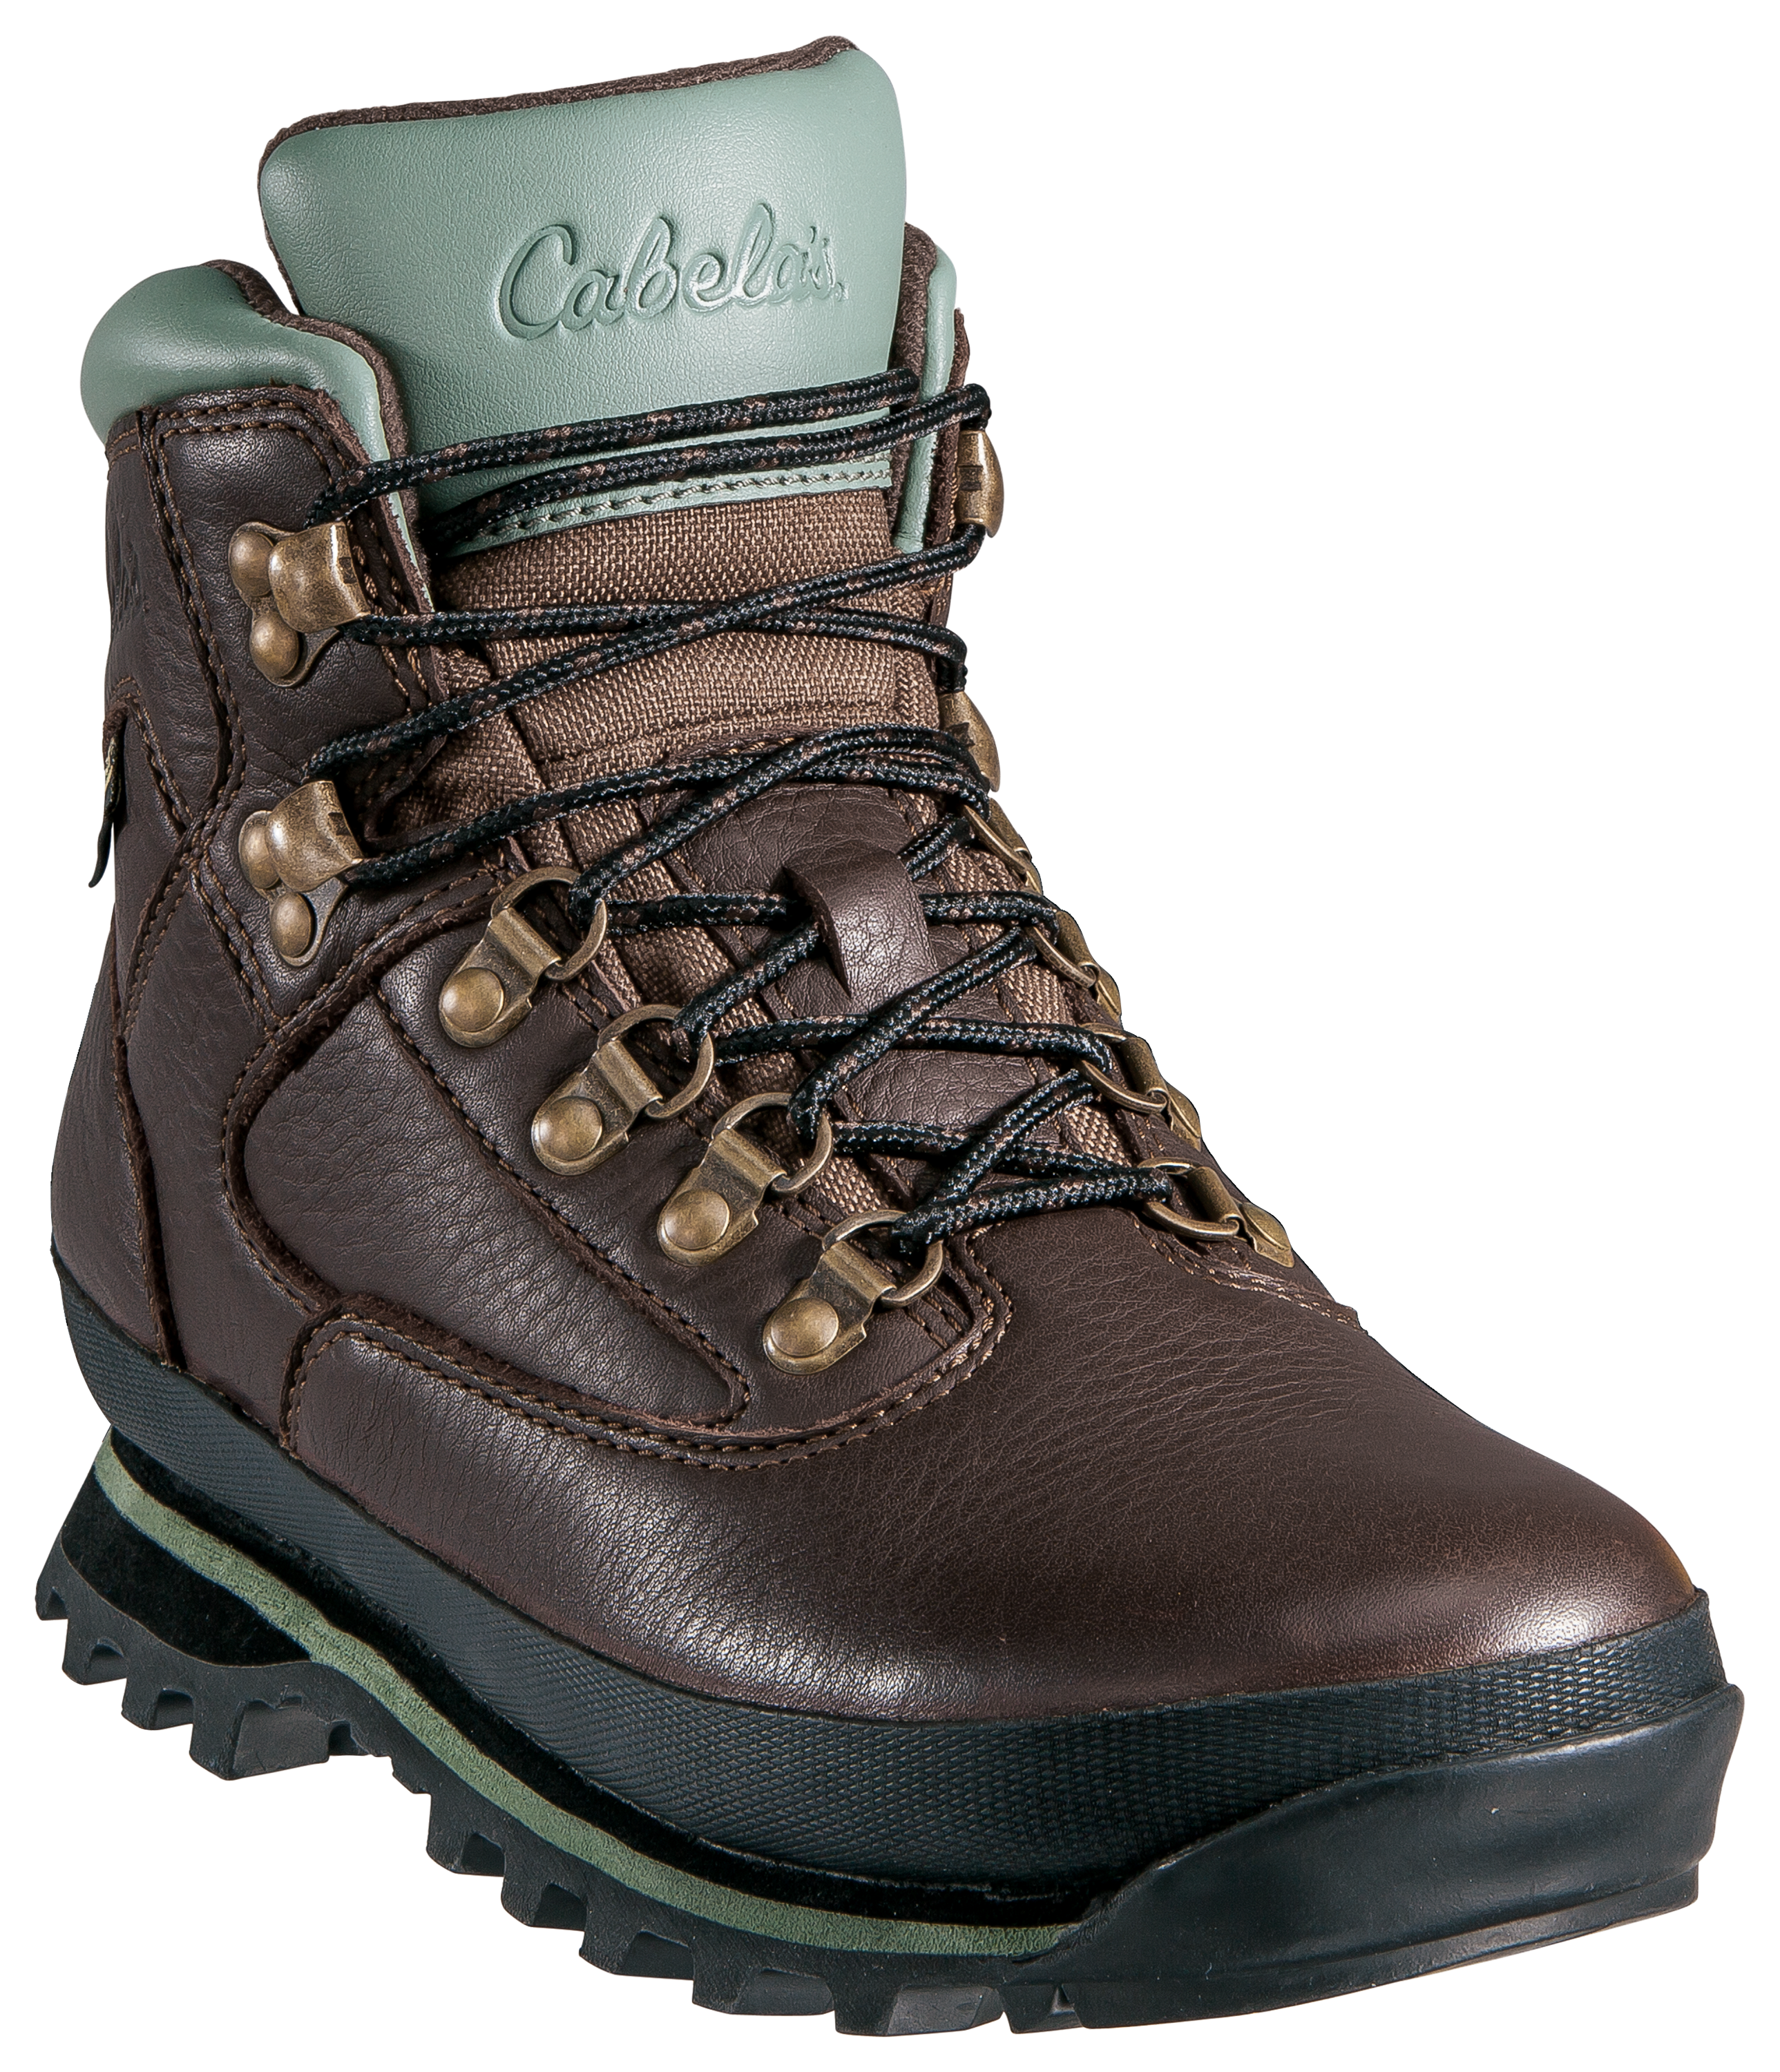 Cabela's Rimrock Mid GORE-TEX Hiking Boots for Ladies - Brown - 8 M